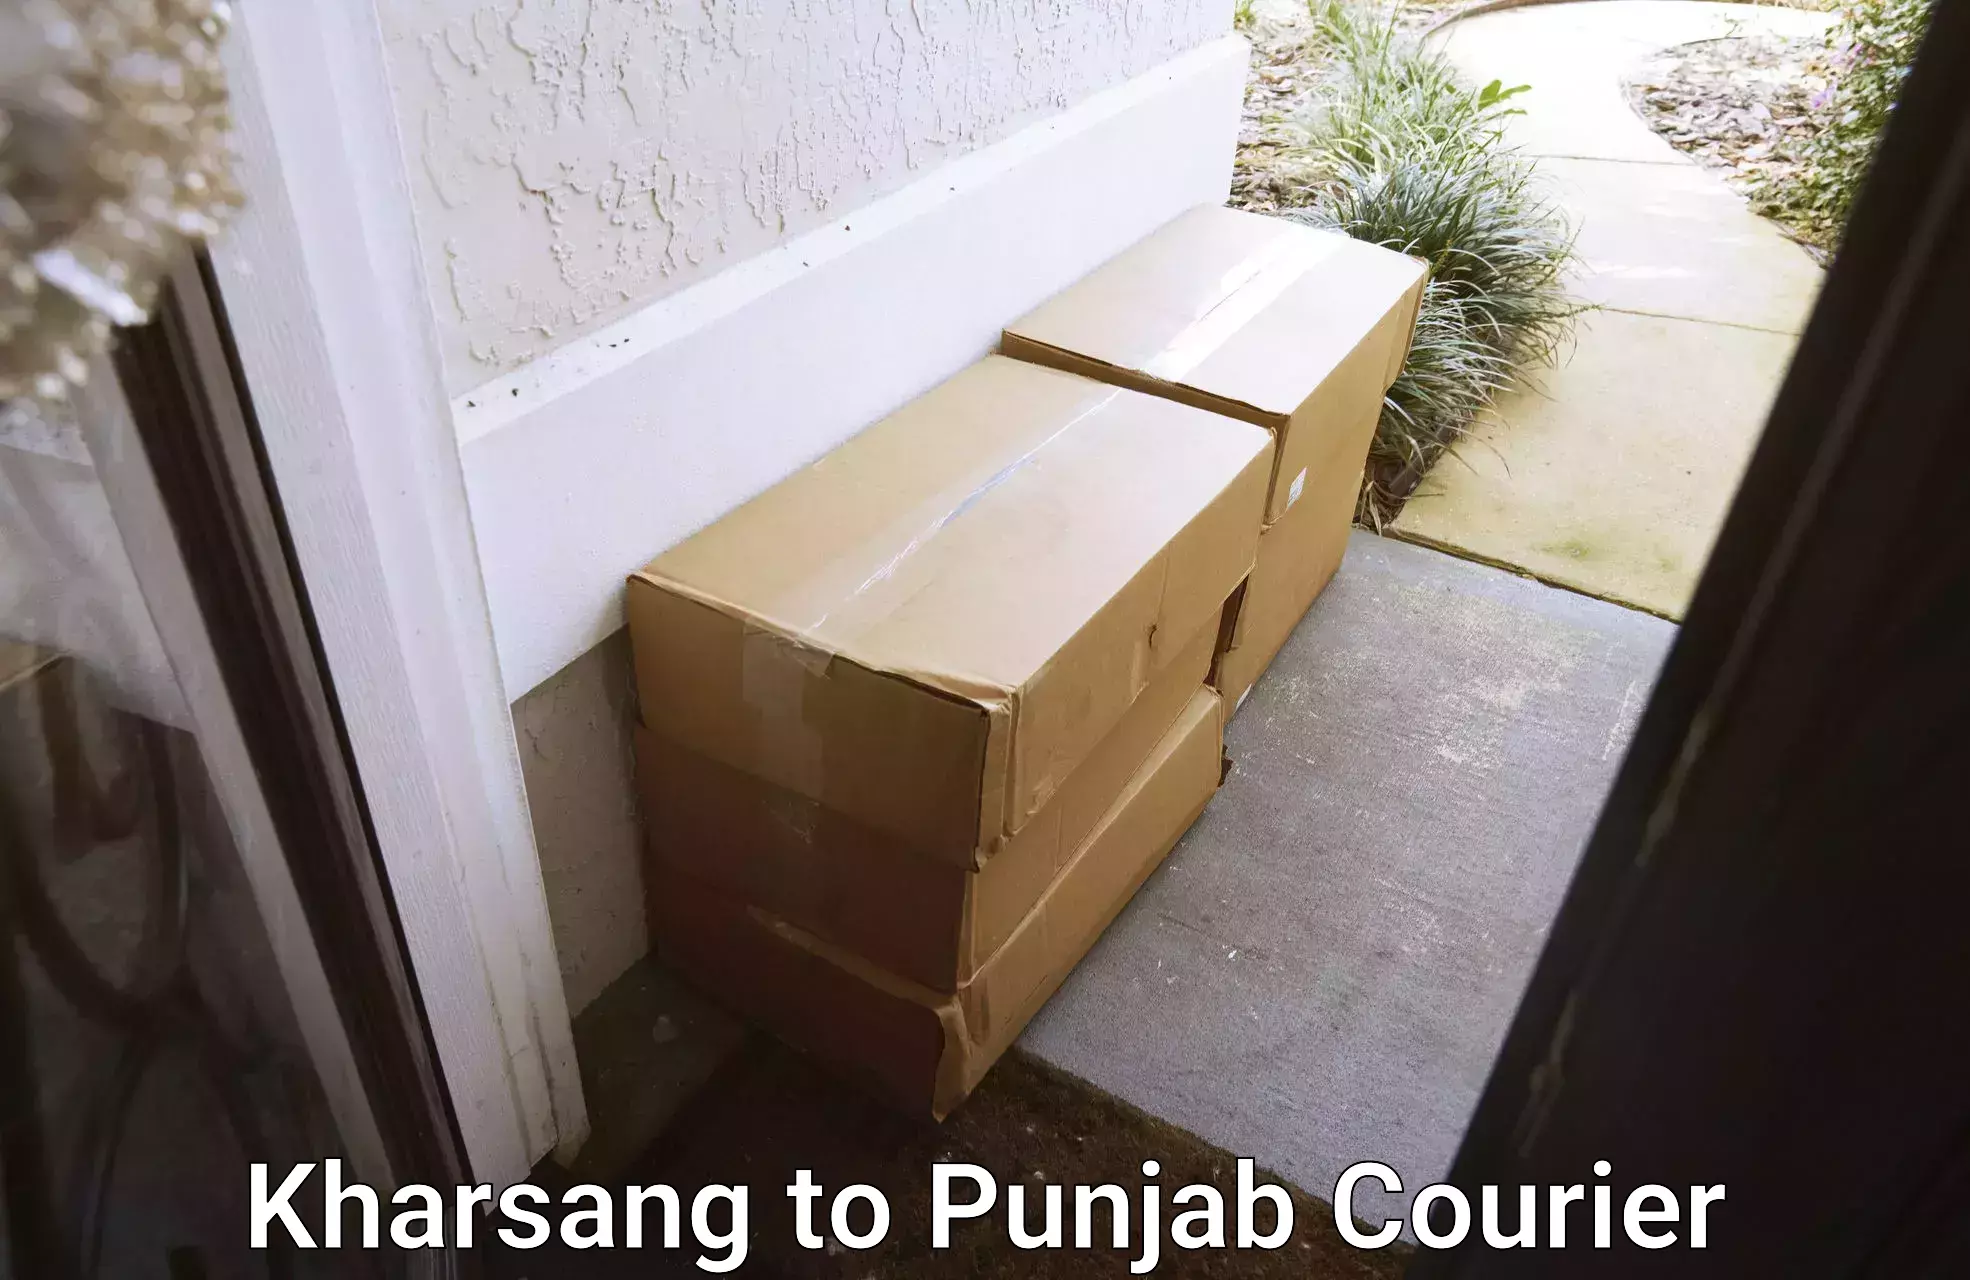 24-hour delivery options Kharsang to Dera Bassi